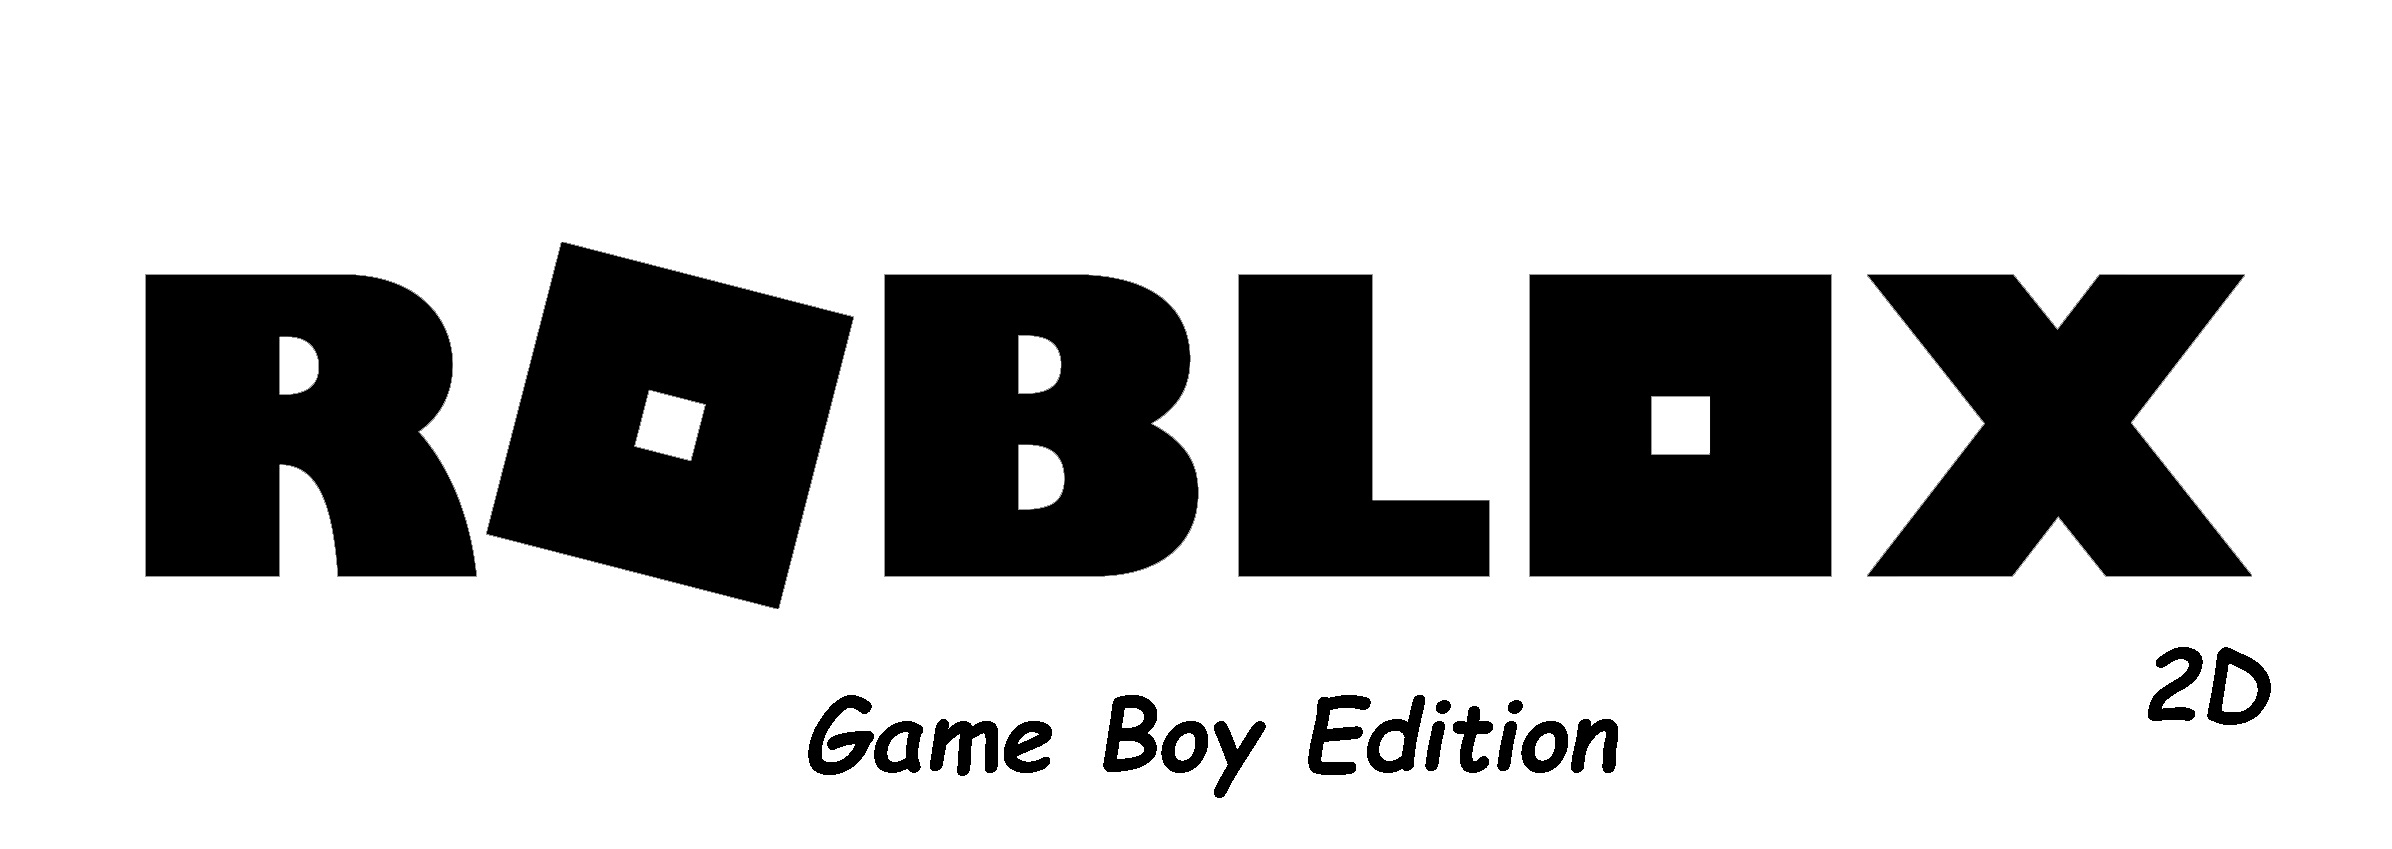 Roblox 2d Game Boy Edition By Mh Games Remastered - comments in a nutshell roblox